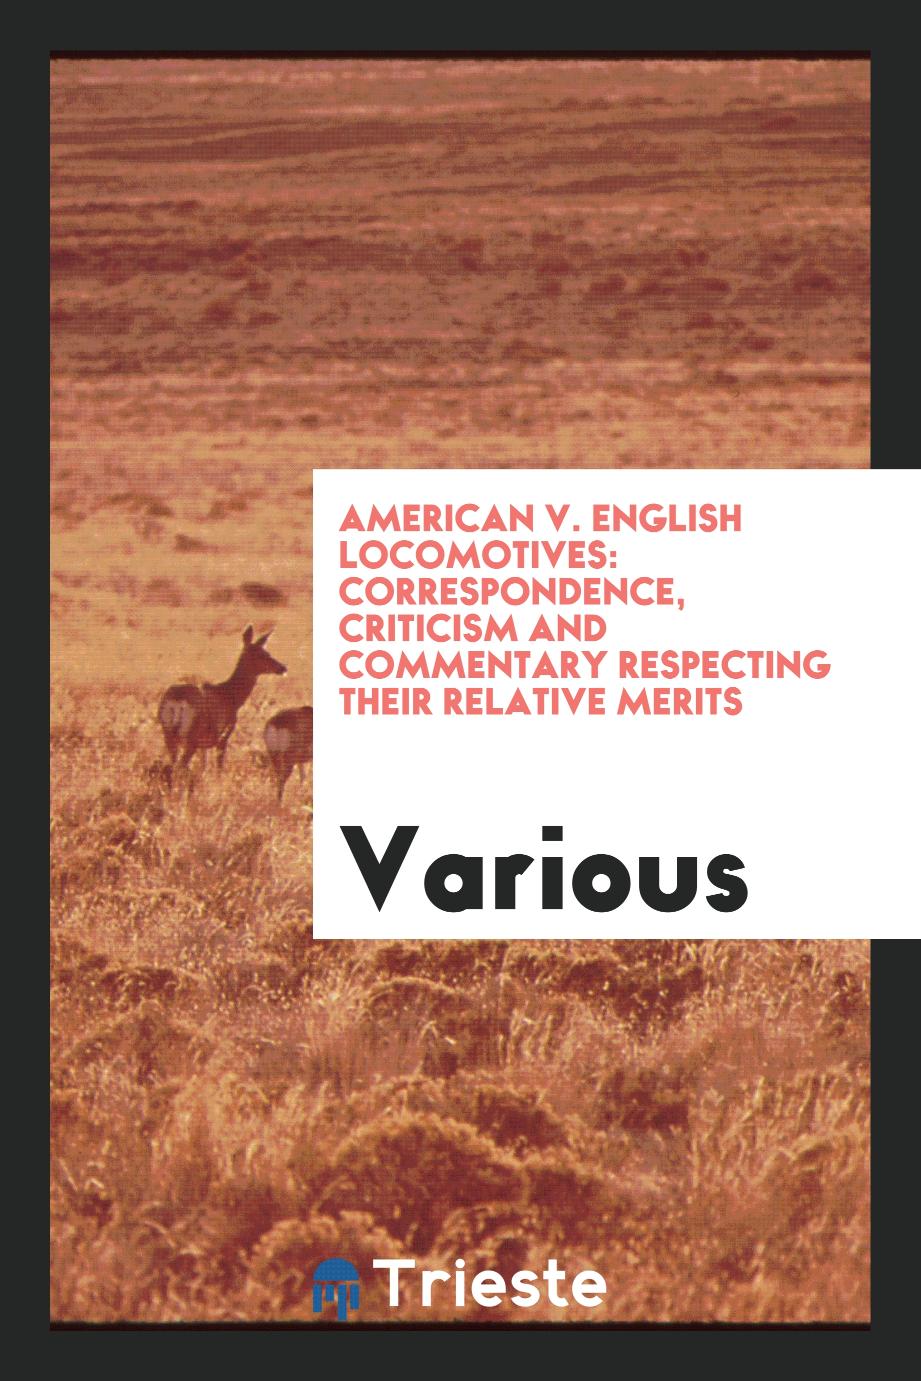 American V. English Locomotives: Correspondence, Criticism and Commentary respecting their relative merits